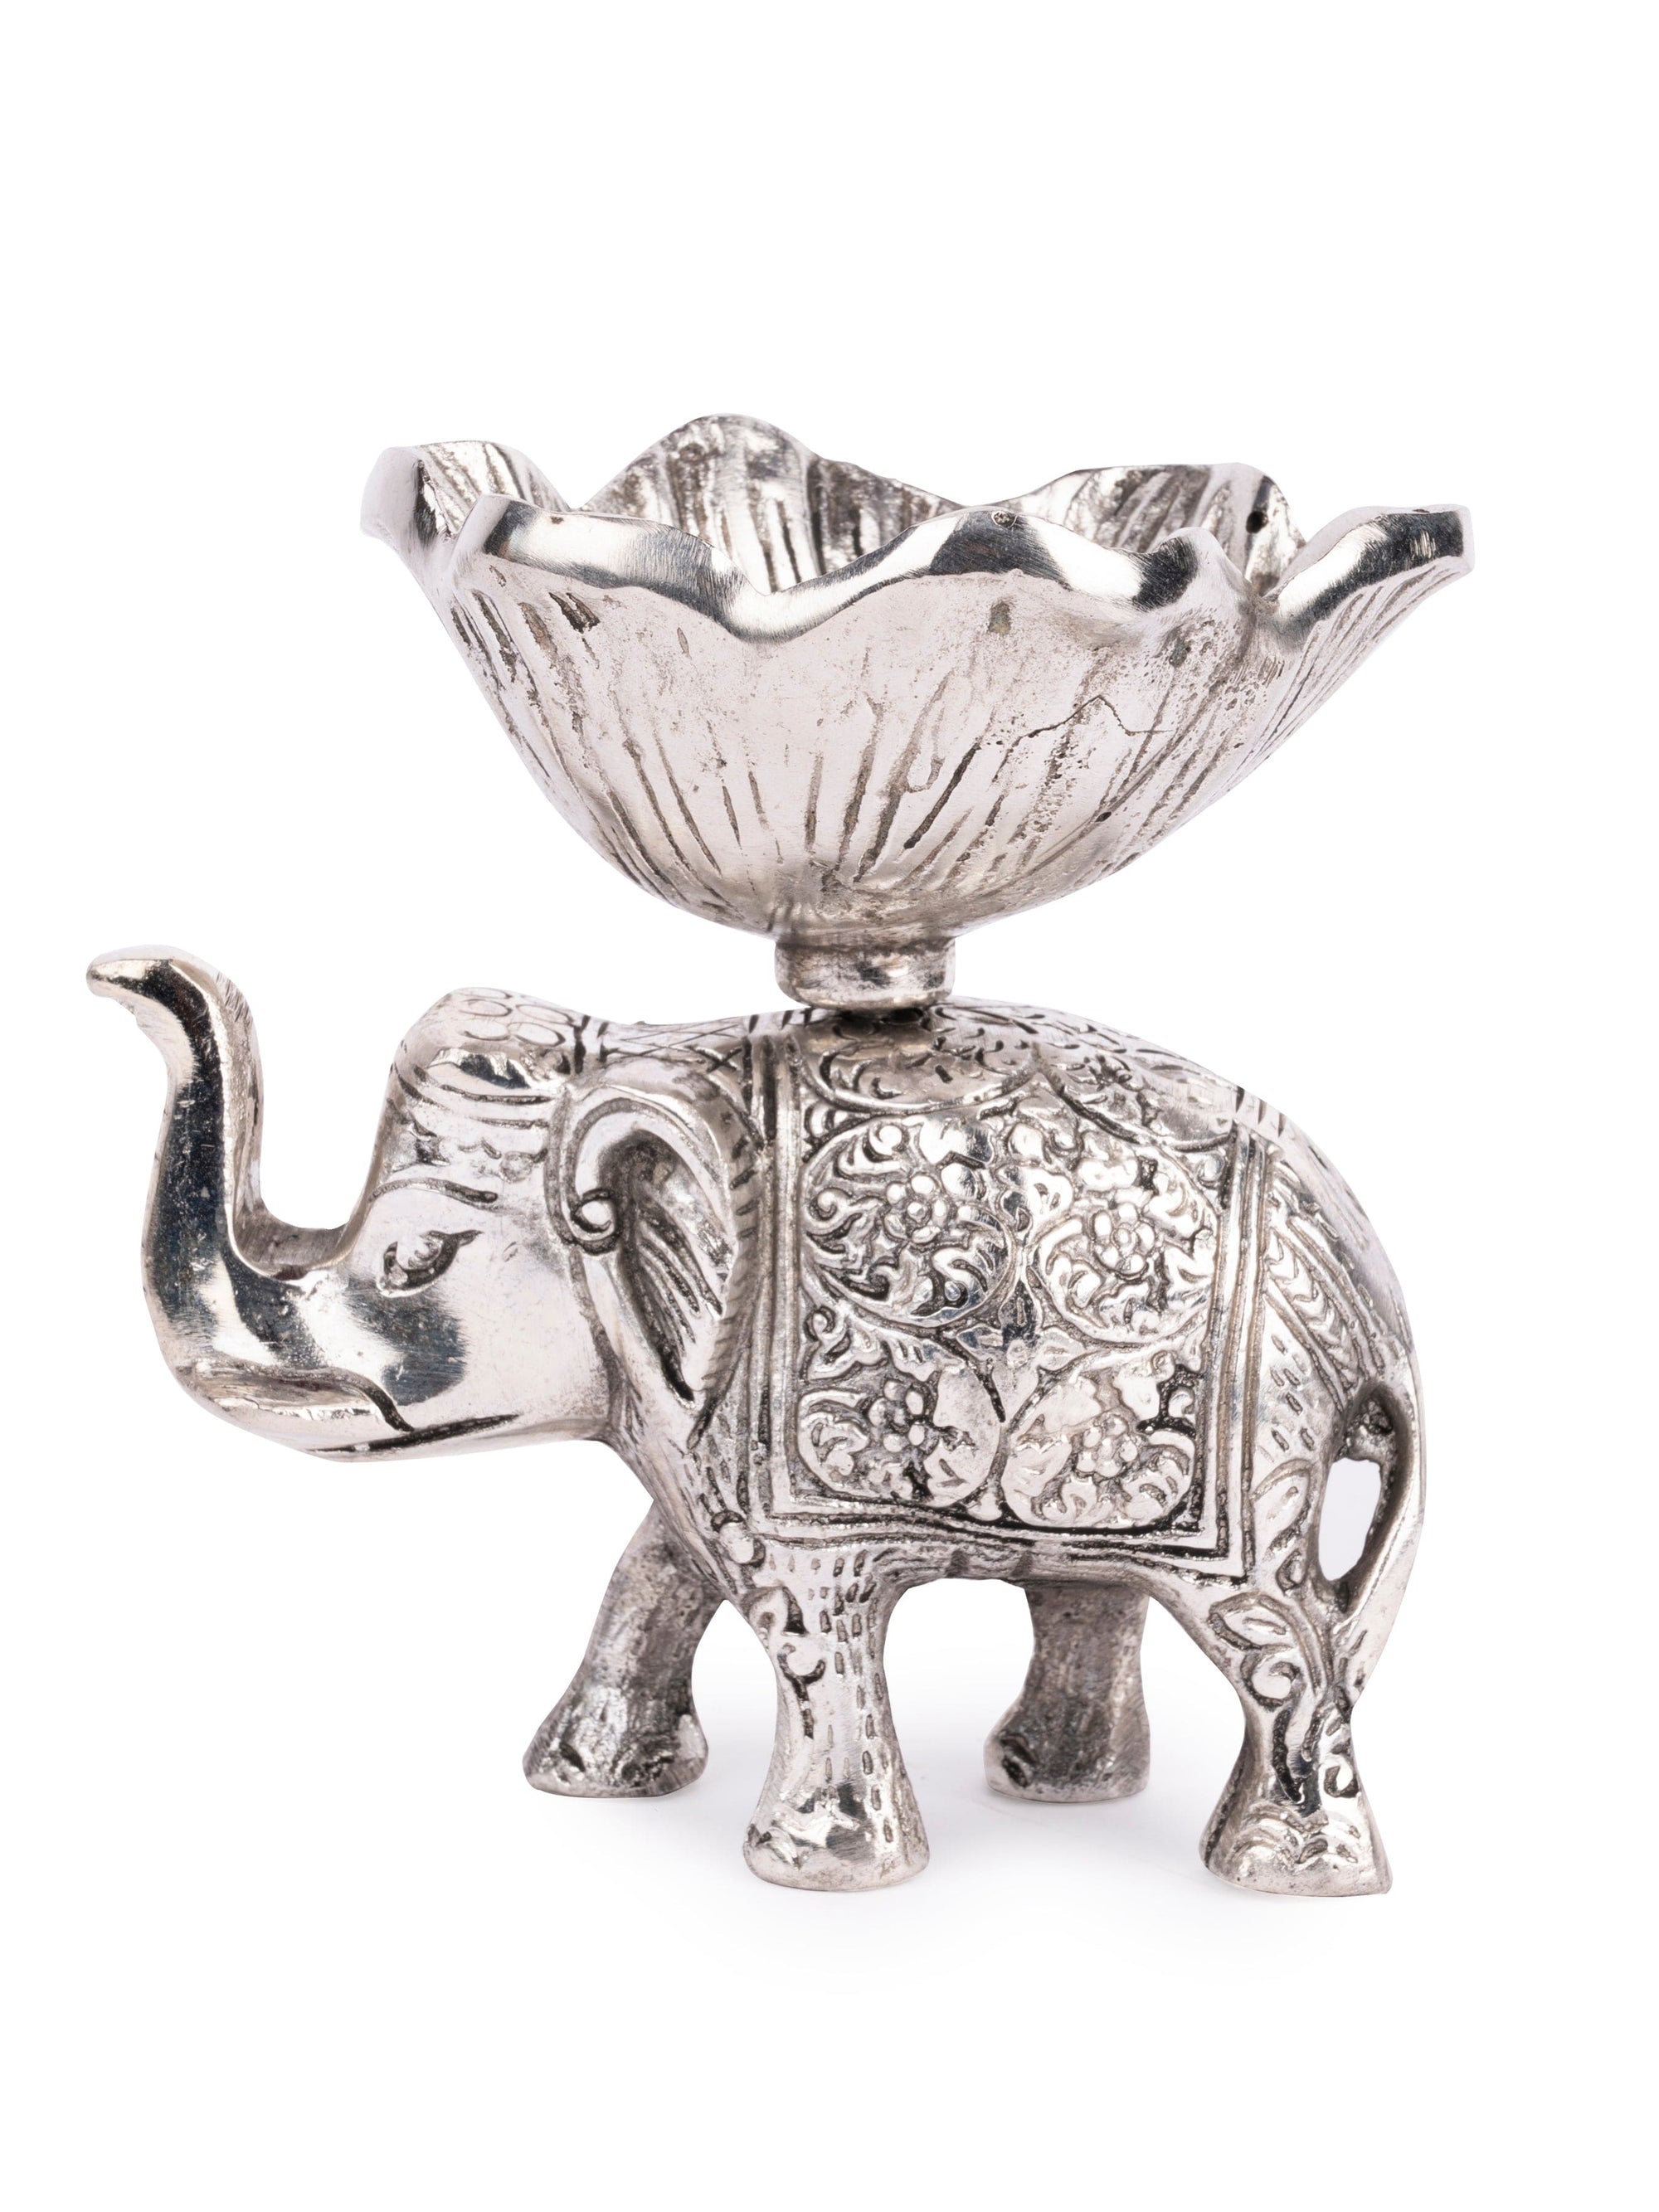 Metal Elephant Serving Bowl for Snacks, Dry fruits Even T light Candles - The Heritage Artifacts